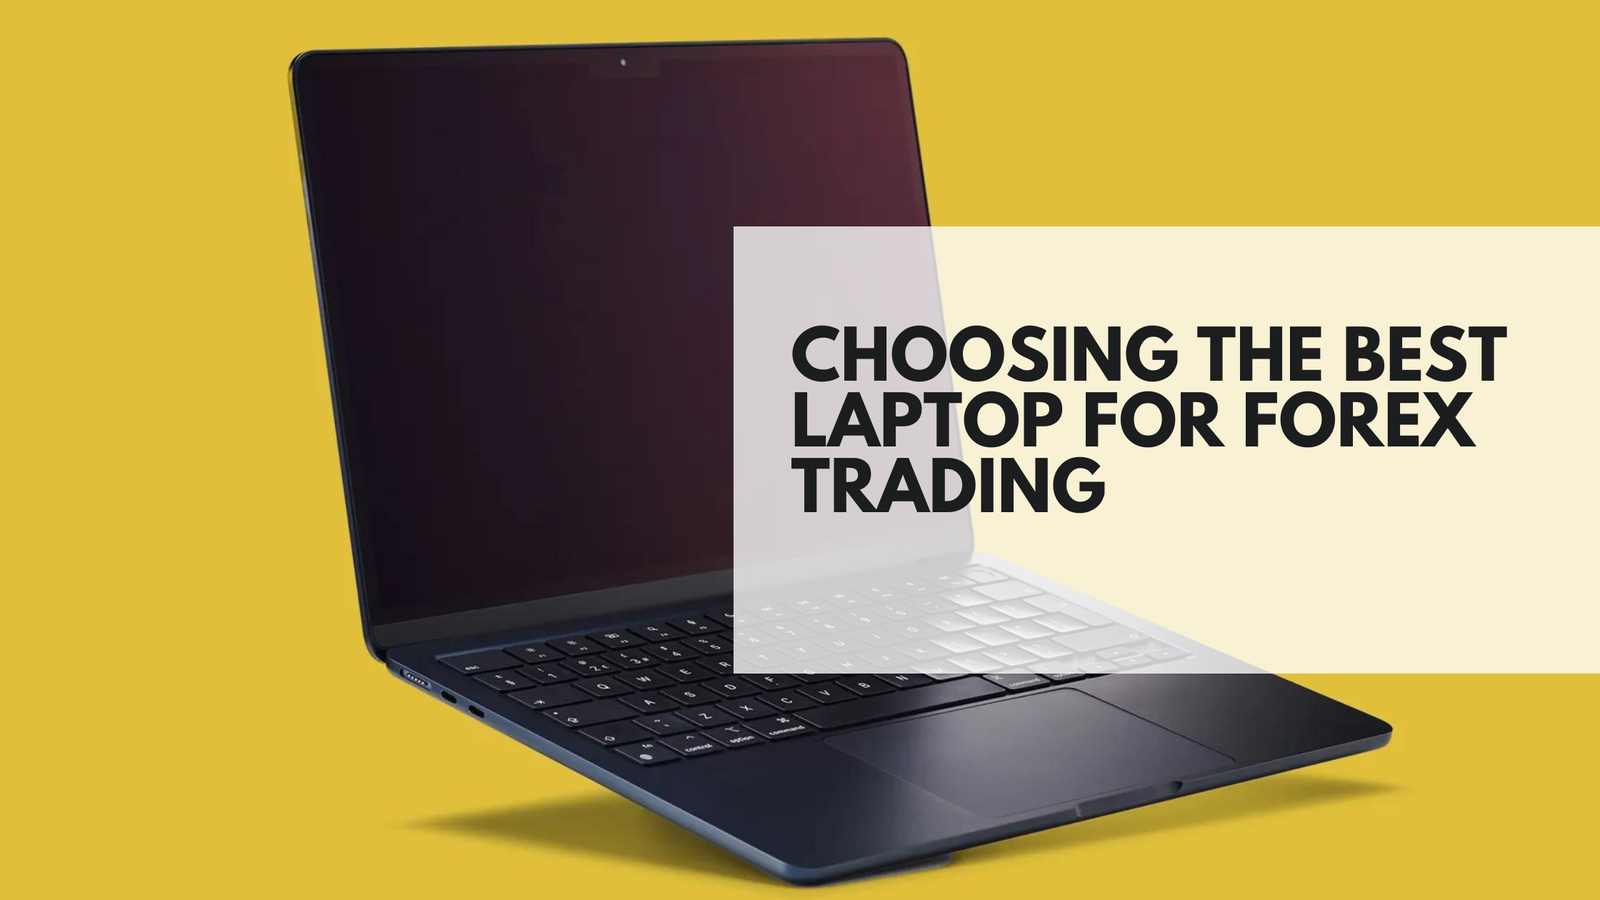 Choosing the Best Laptop for Forex Trading